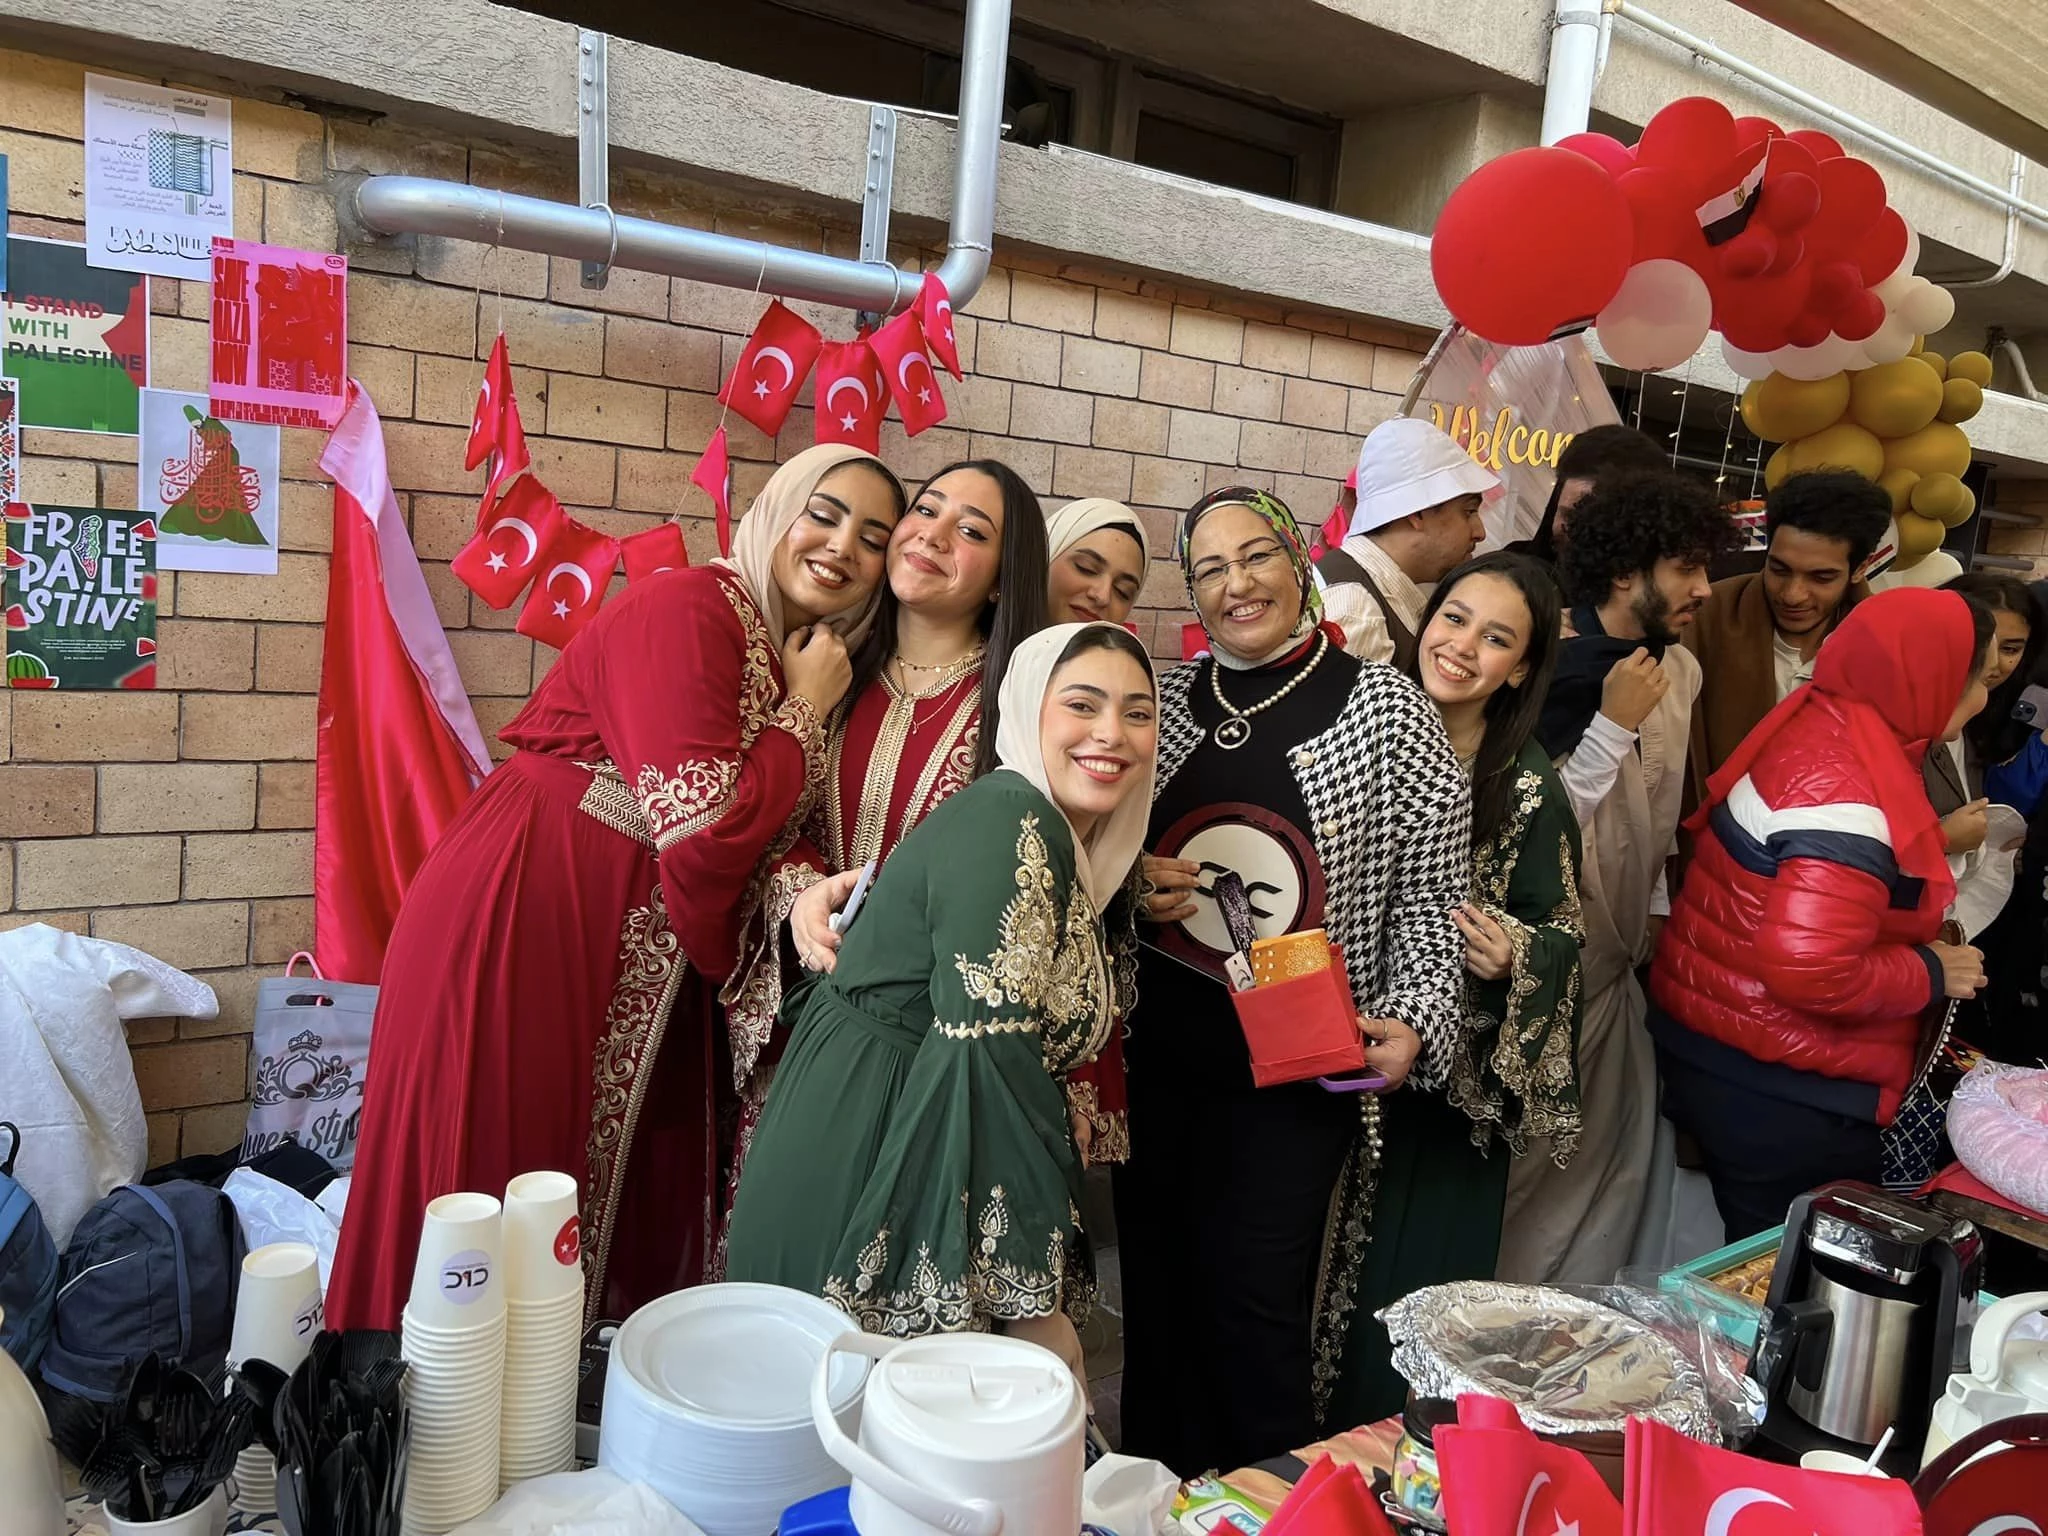 The Department of Cultural and Social Activities in Babi Qir organized an Intercultural Day for students of the College of Language and Media, including performances from various countries about the years of struggle of those peoples on: 12/25/20234